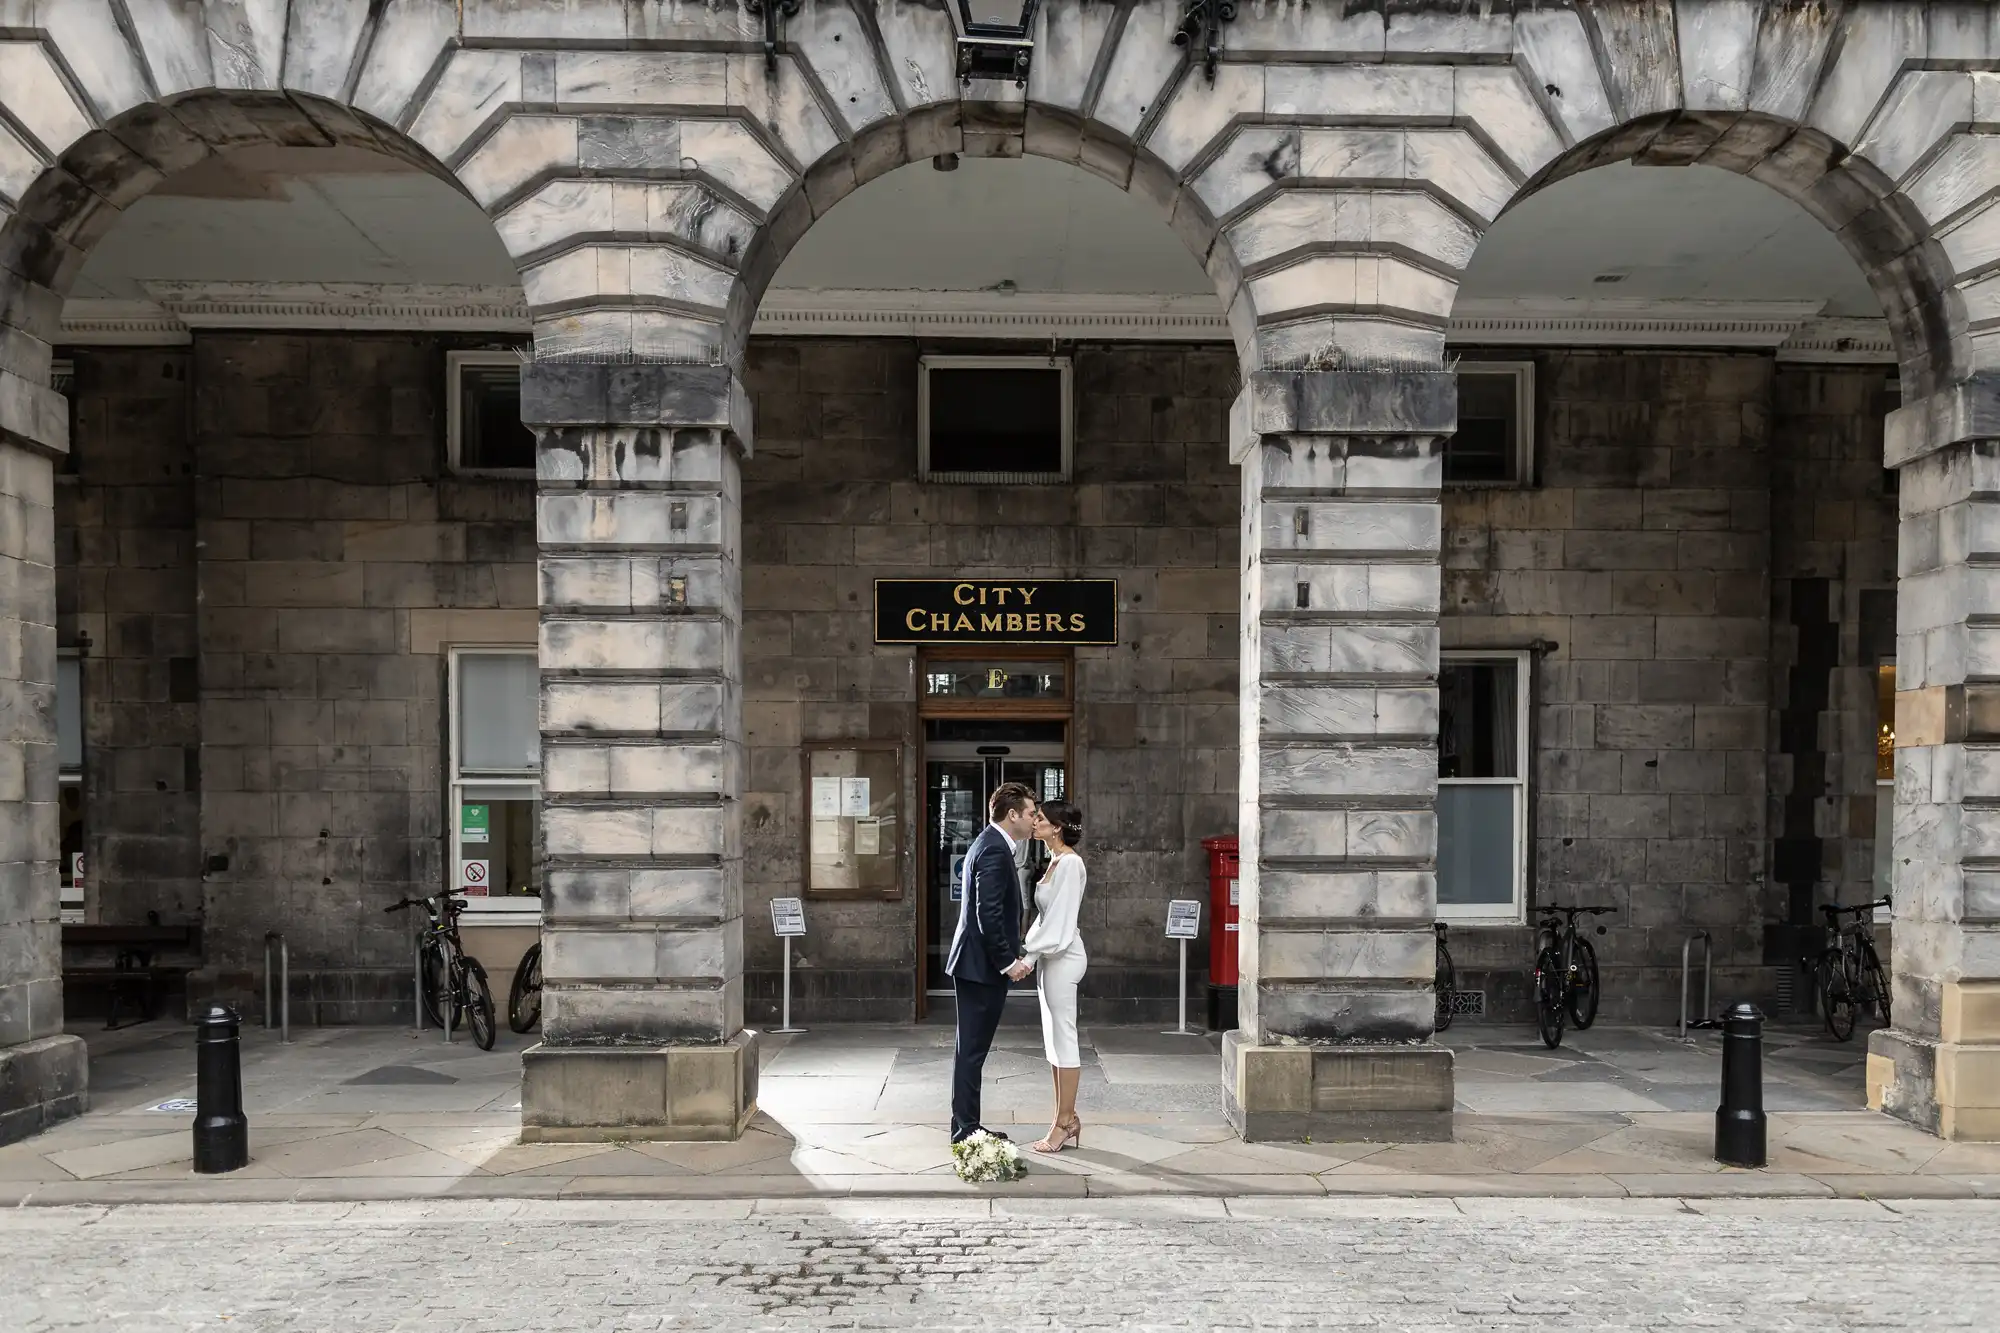 A couple kisses under the archway of the city chambers building, with bicycles parked nearby and the structure exhibiting grand stonework.